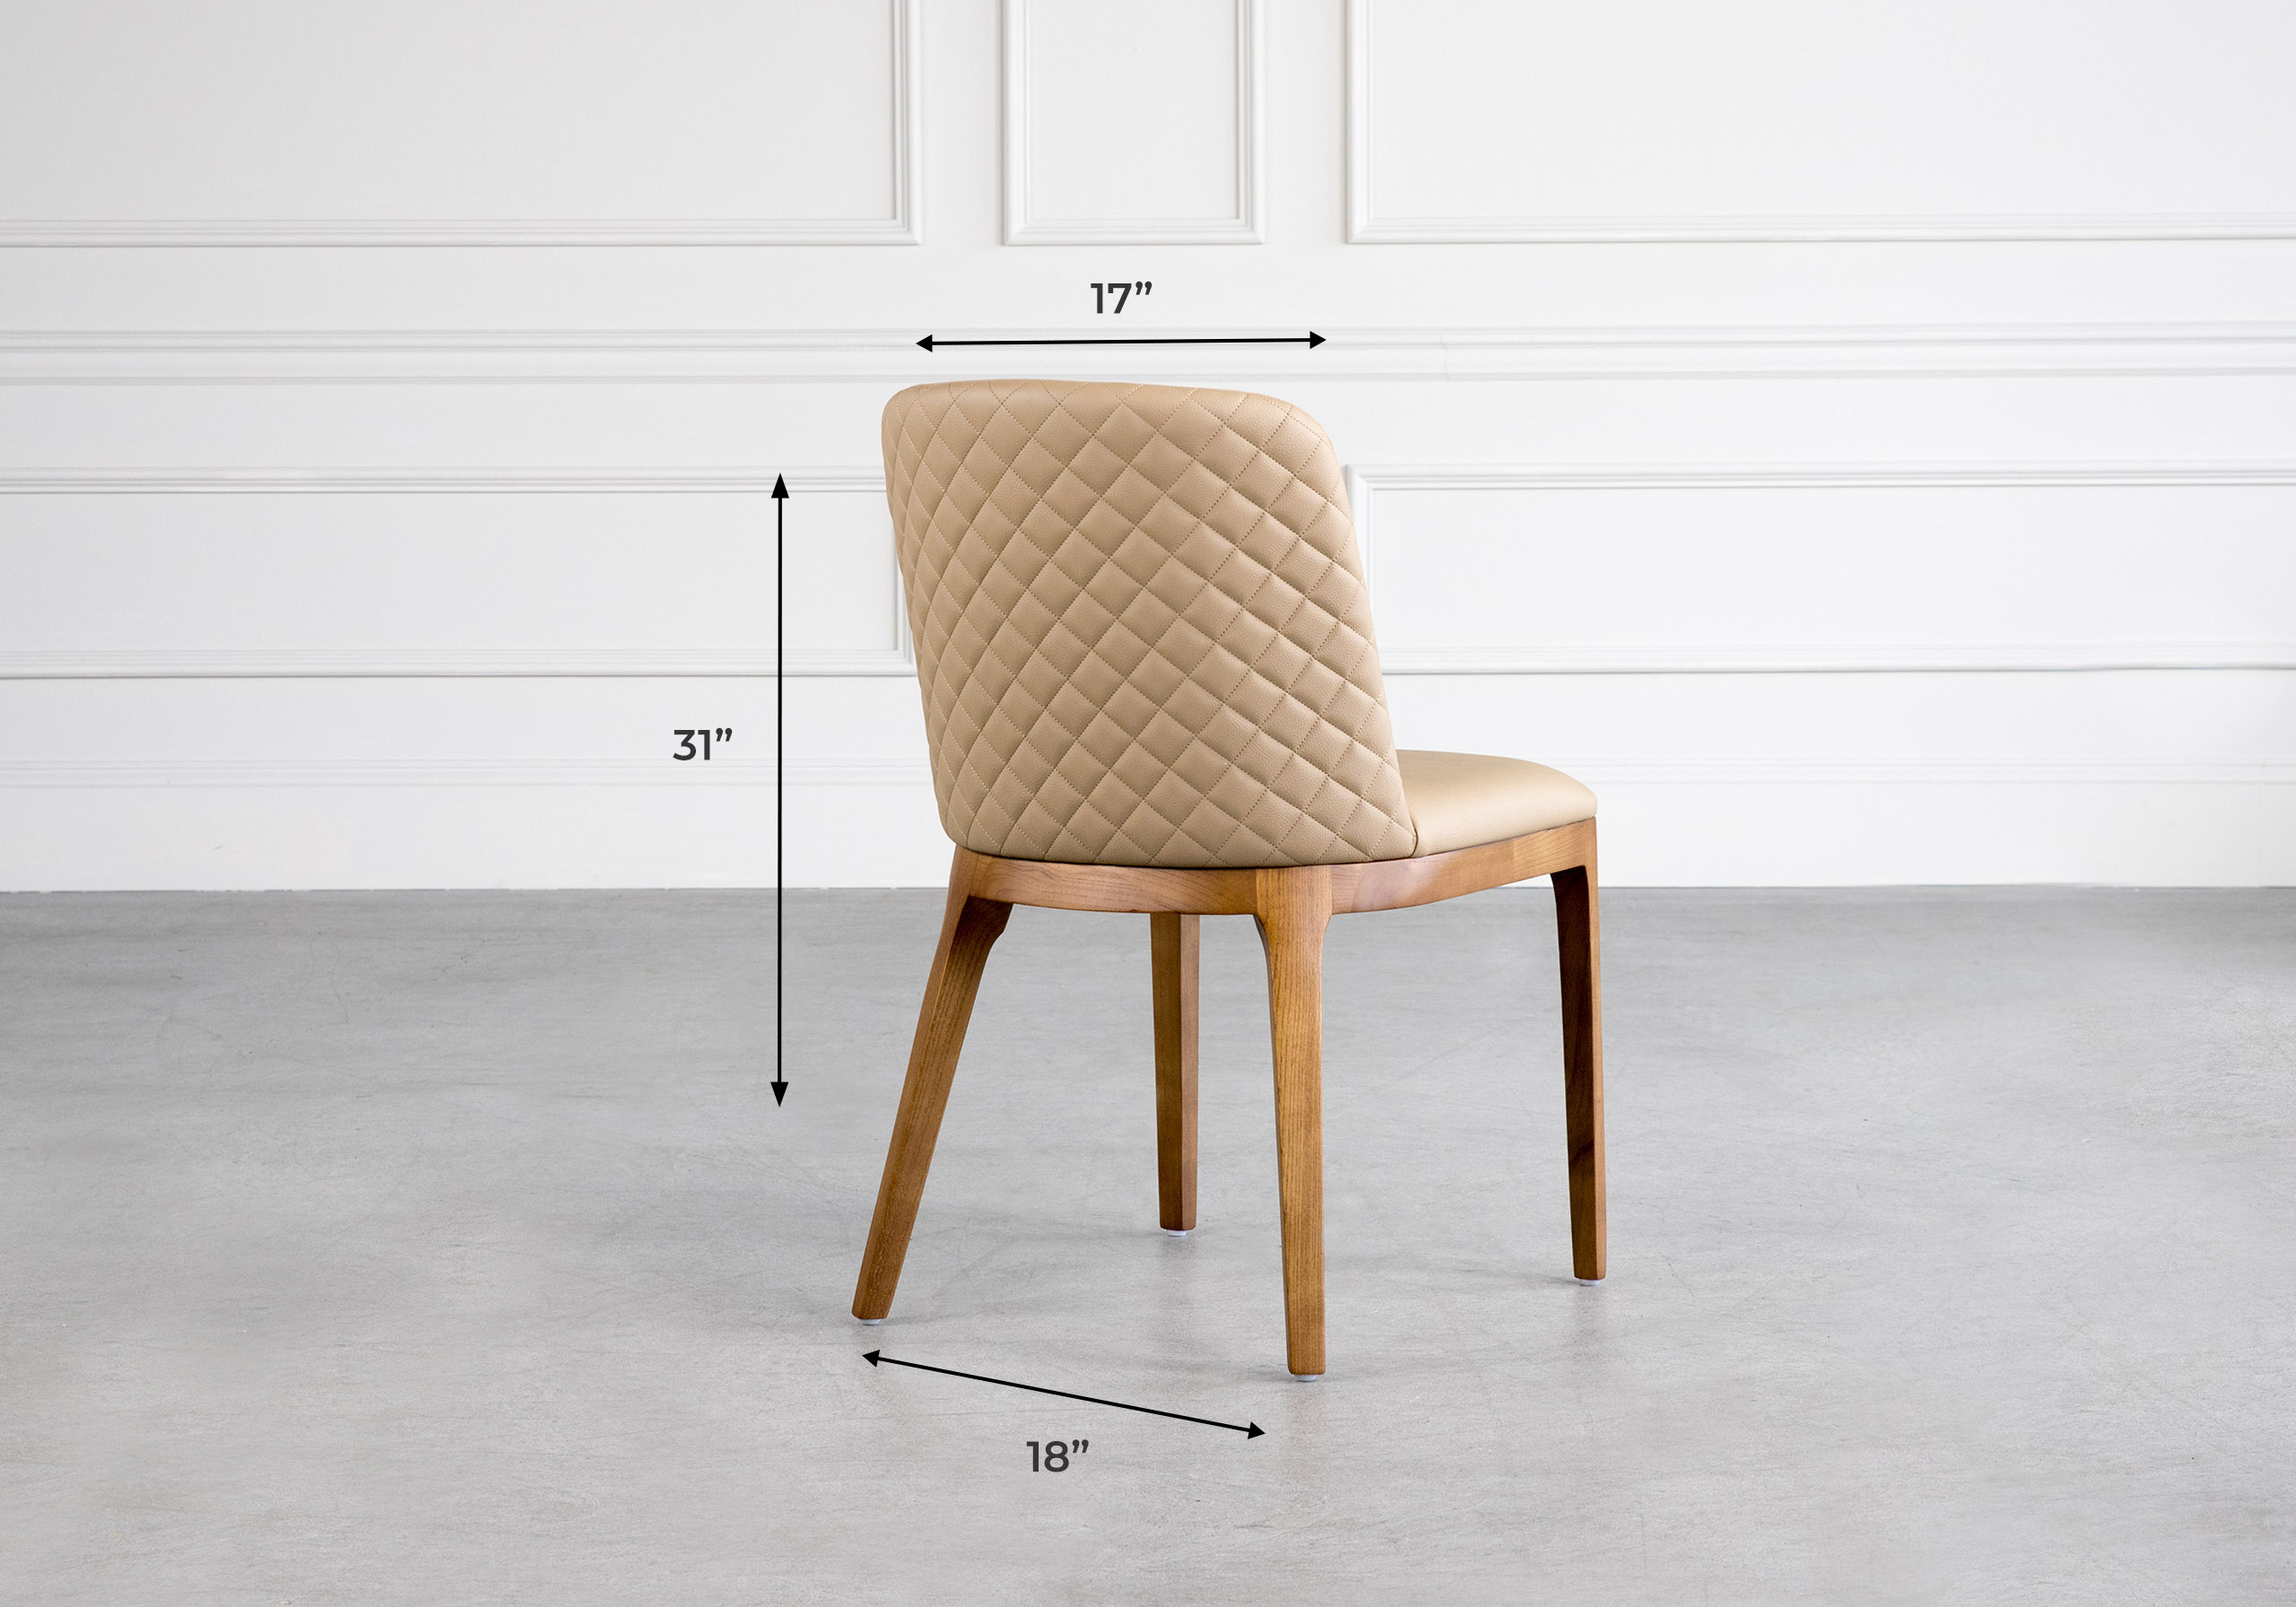 Will Dining Chair Dimensions